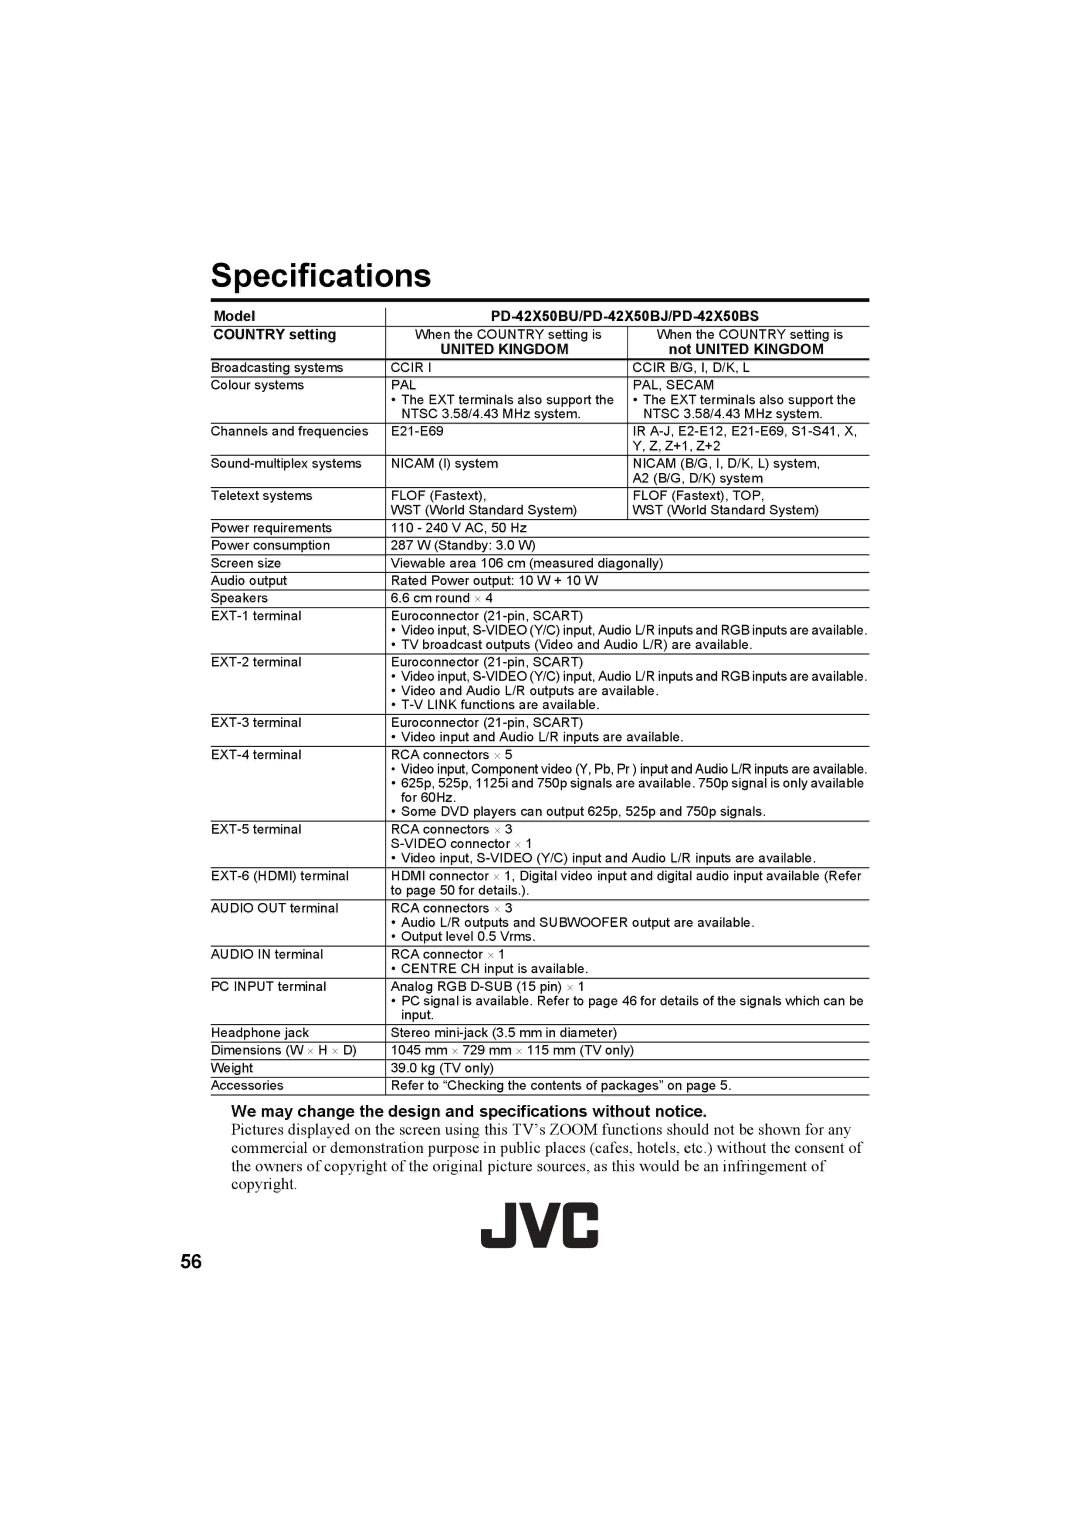 JVC PD-42X50BU, PD-42X50BJ, PD-42X50BS manual Specifications, We may change the design and specifications without notice 